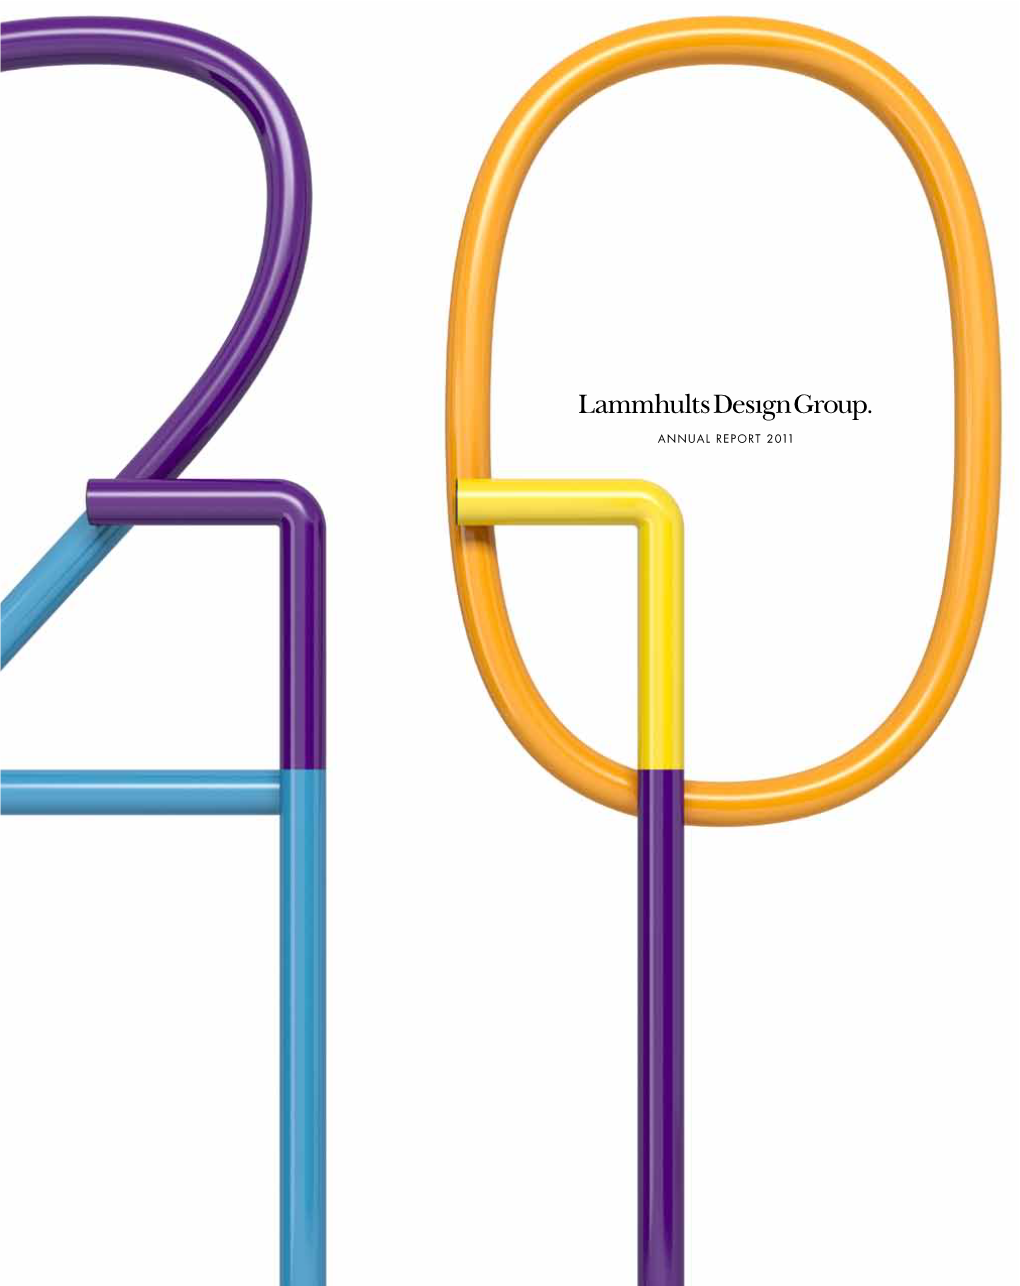 Annual Report 2011 Lammhults Design Group Creates Positive Experiences Through Modern Interiors for a Global Audience